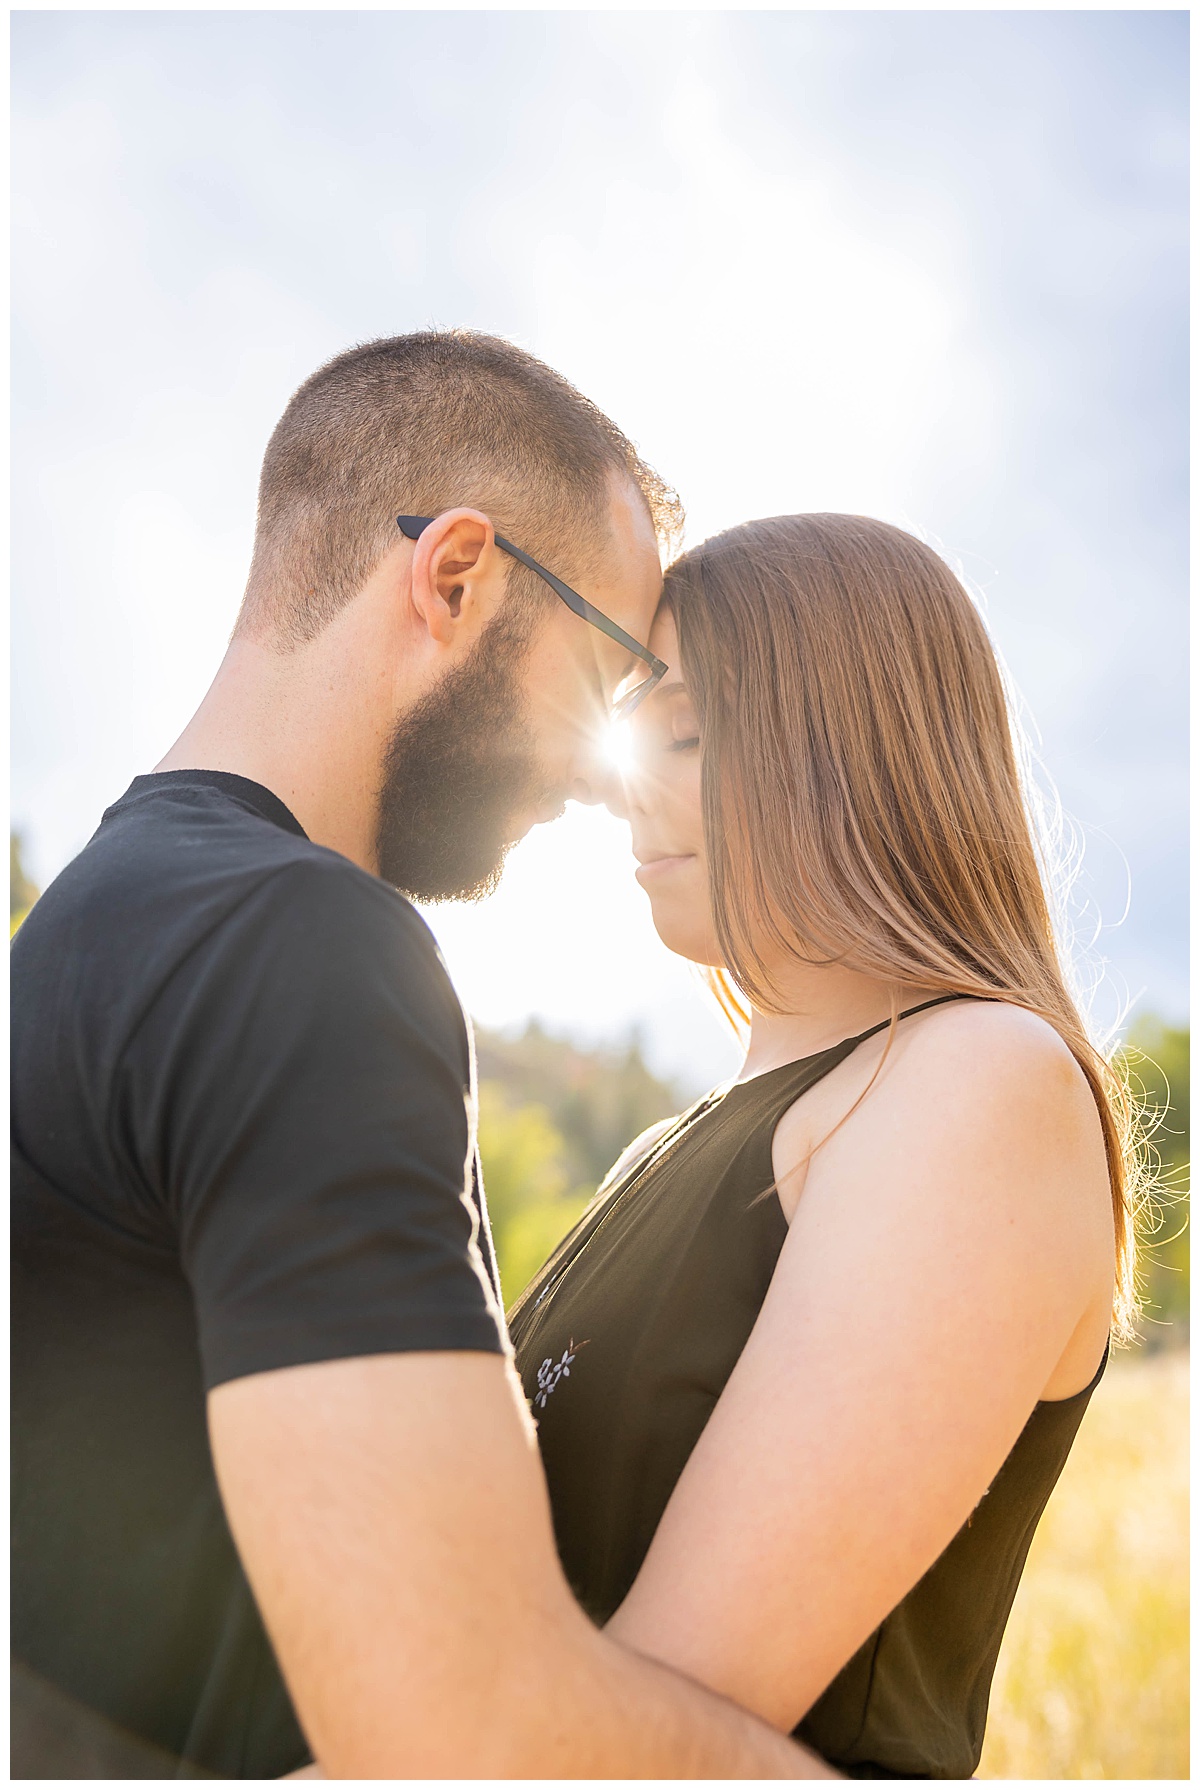 A couple poses with the sun behind them for a fall engagement session. The woman is wearing a short olive green dress and the man is wearing a black t-shirt and gray shorts.